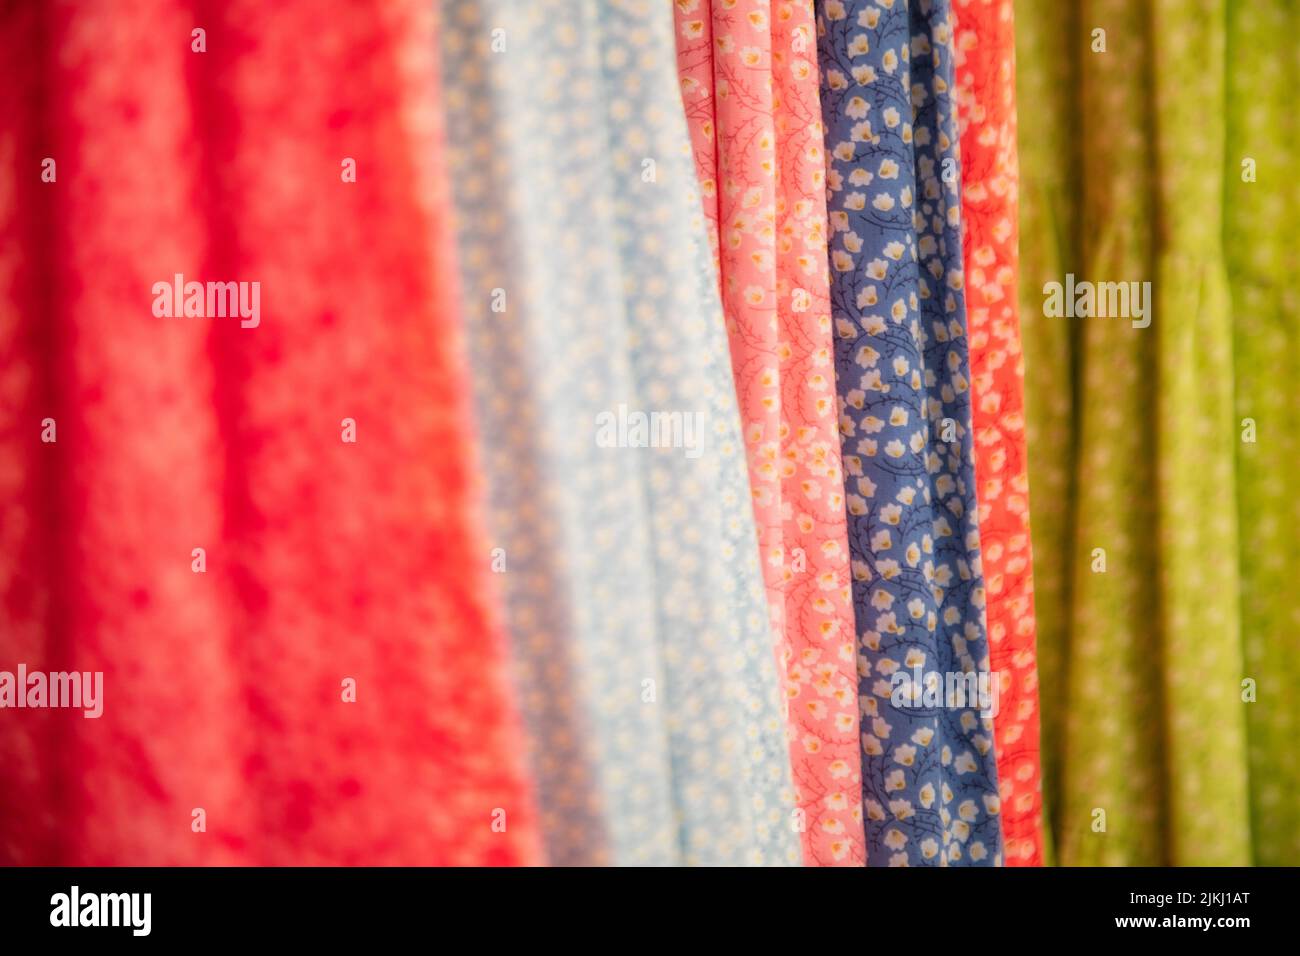 Spain, Balearic islands, Mallorca, district of Manacor, Calas de Mallorca. Colorful beach clothes for sale in the shops in the city center, close up view of the fabric Stock Photo